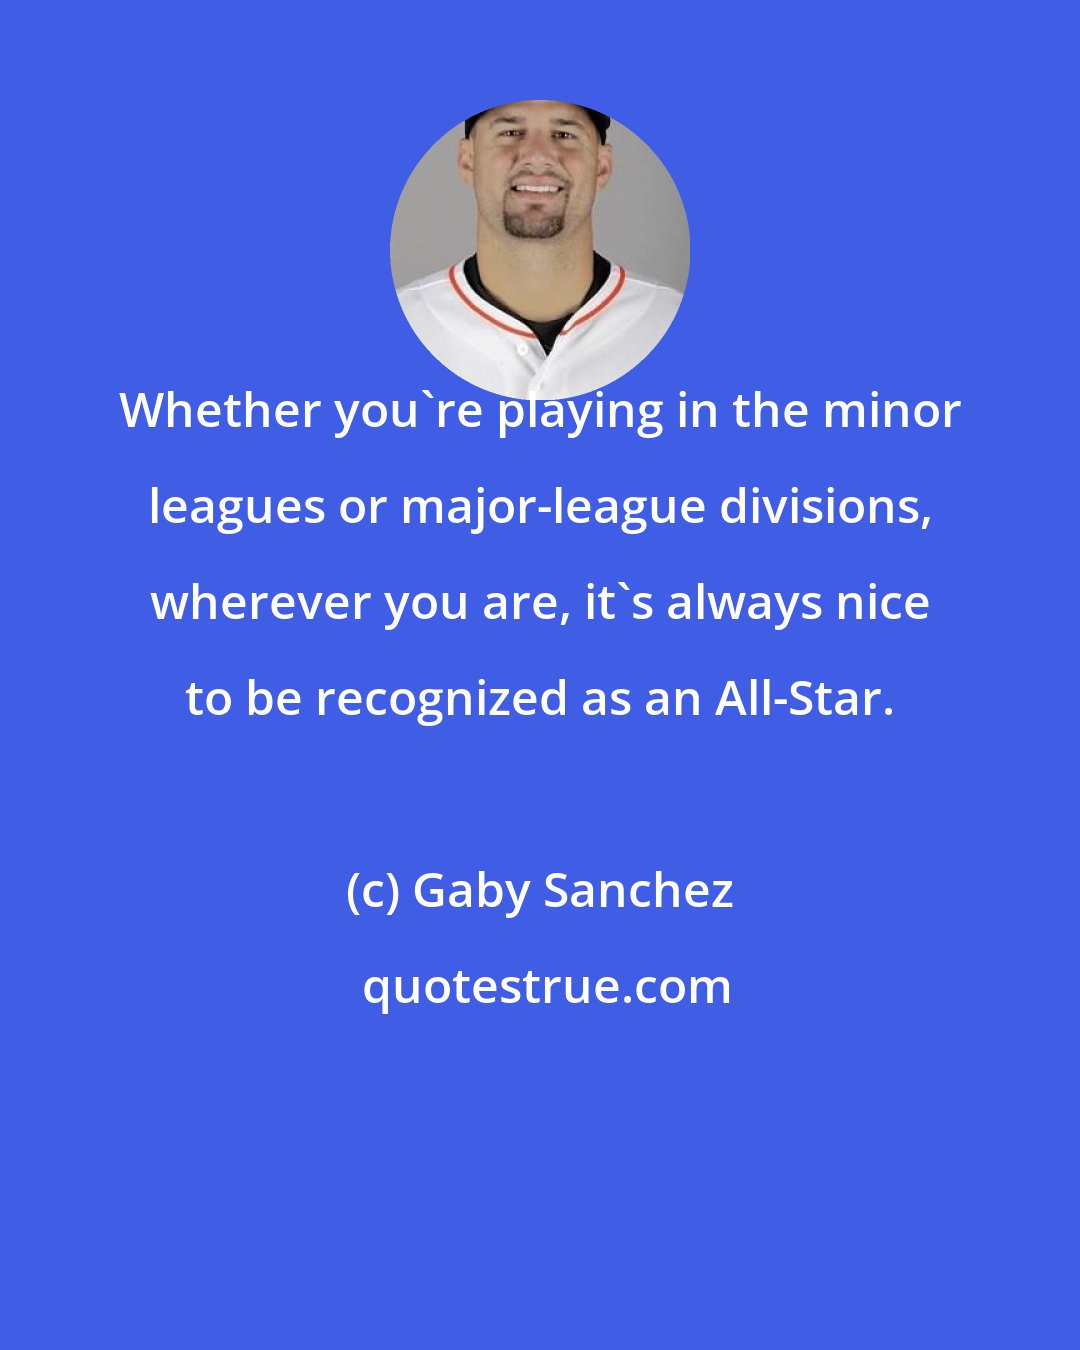 Gaby Sanchez: Whether you're playing in the minor leagues or major-league divisions, wherever you are, it's always nice to be recognized as an All-Star.